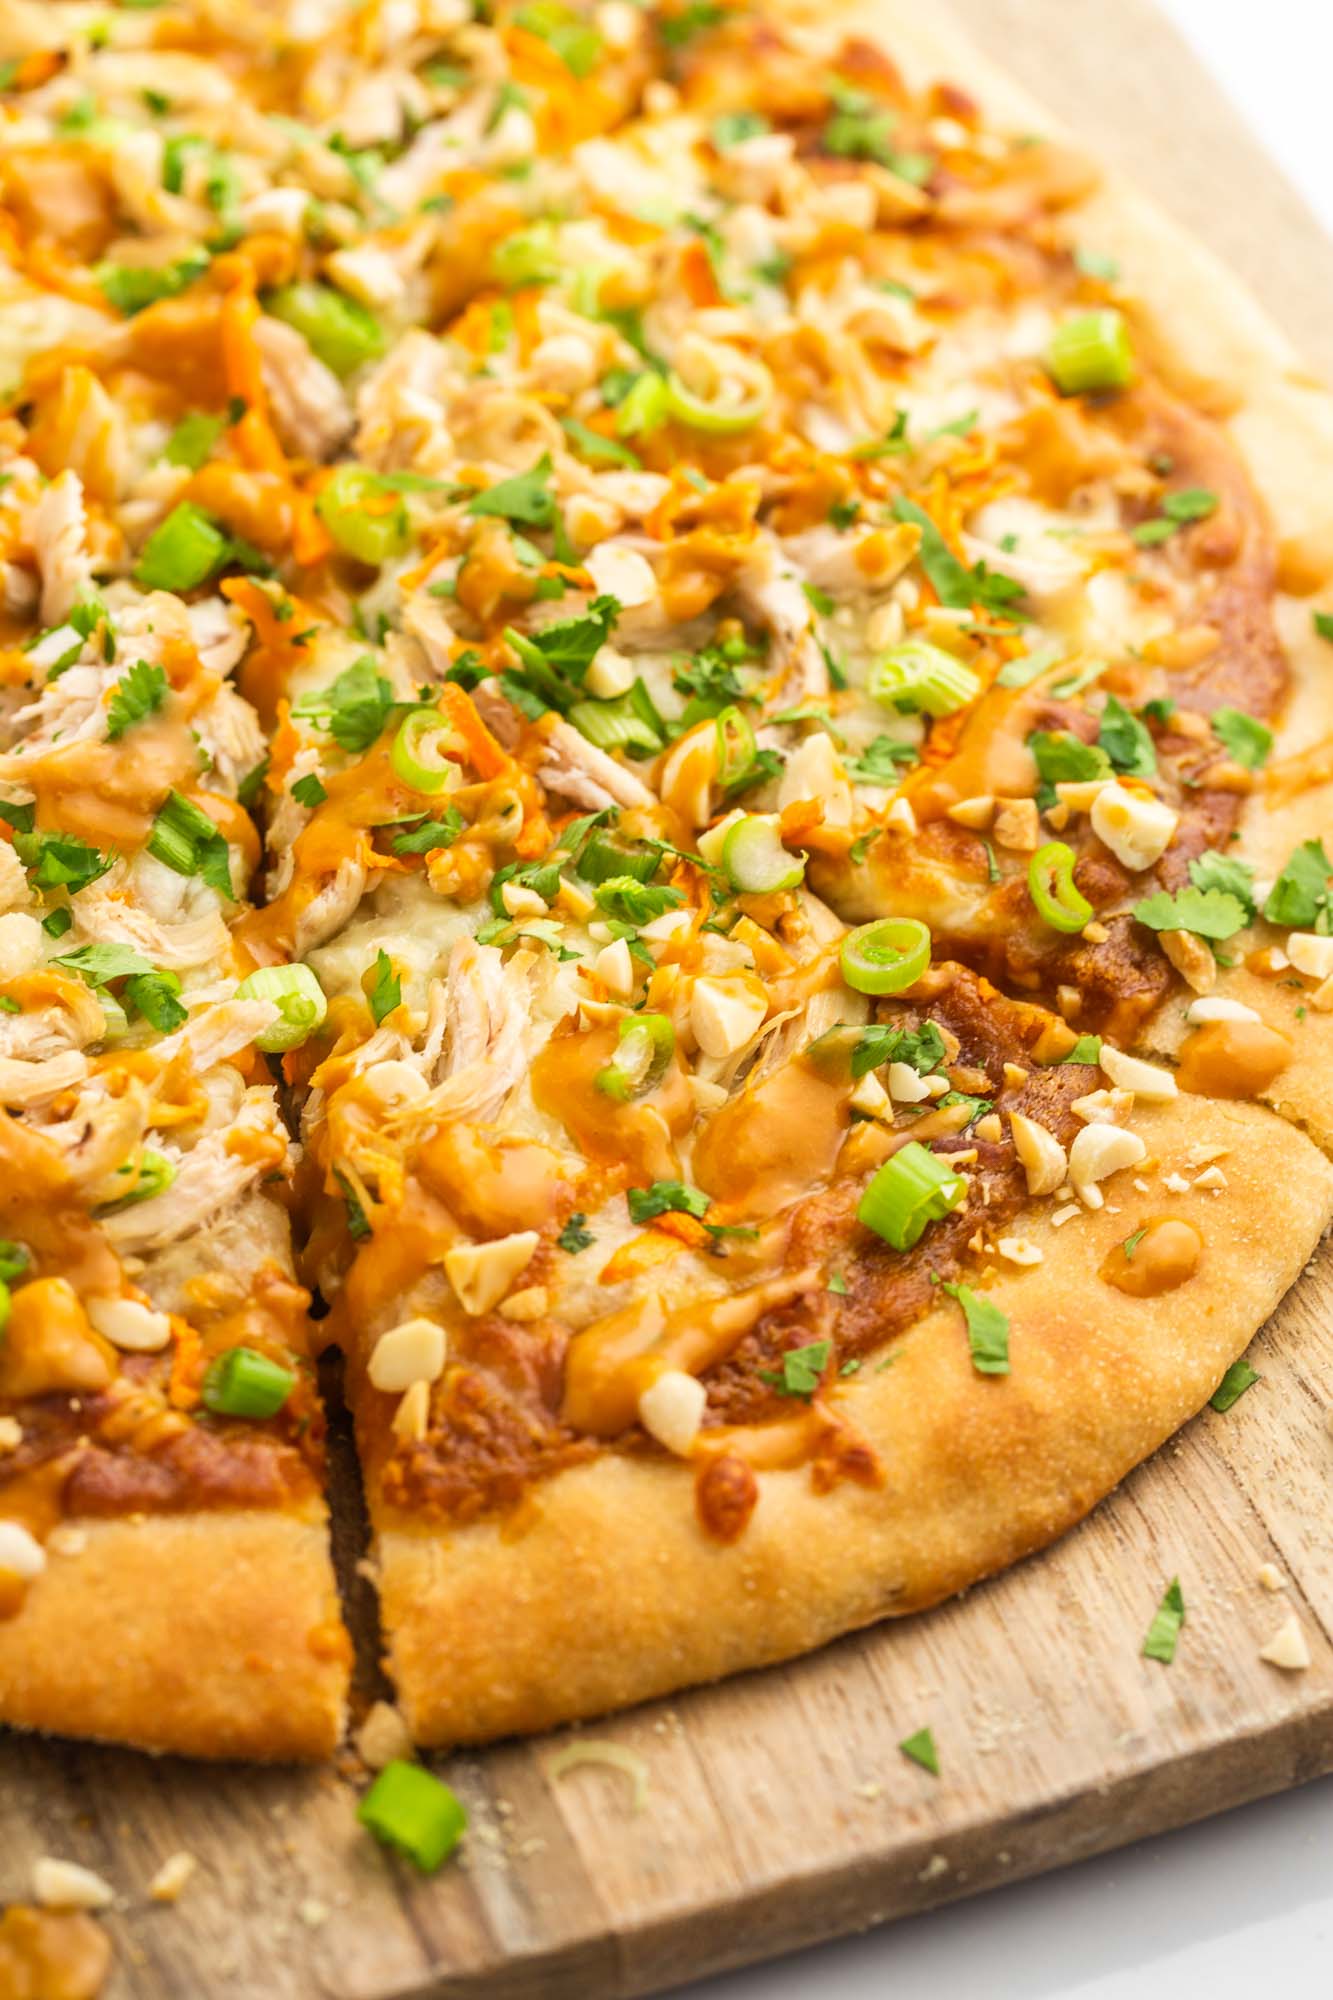 Sliced thai chicken pizza, garnished with sliced green onions, and roasted peanuts.